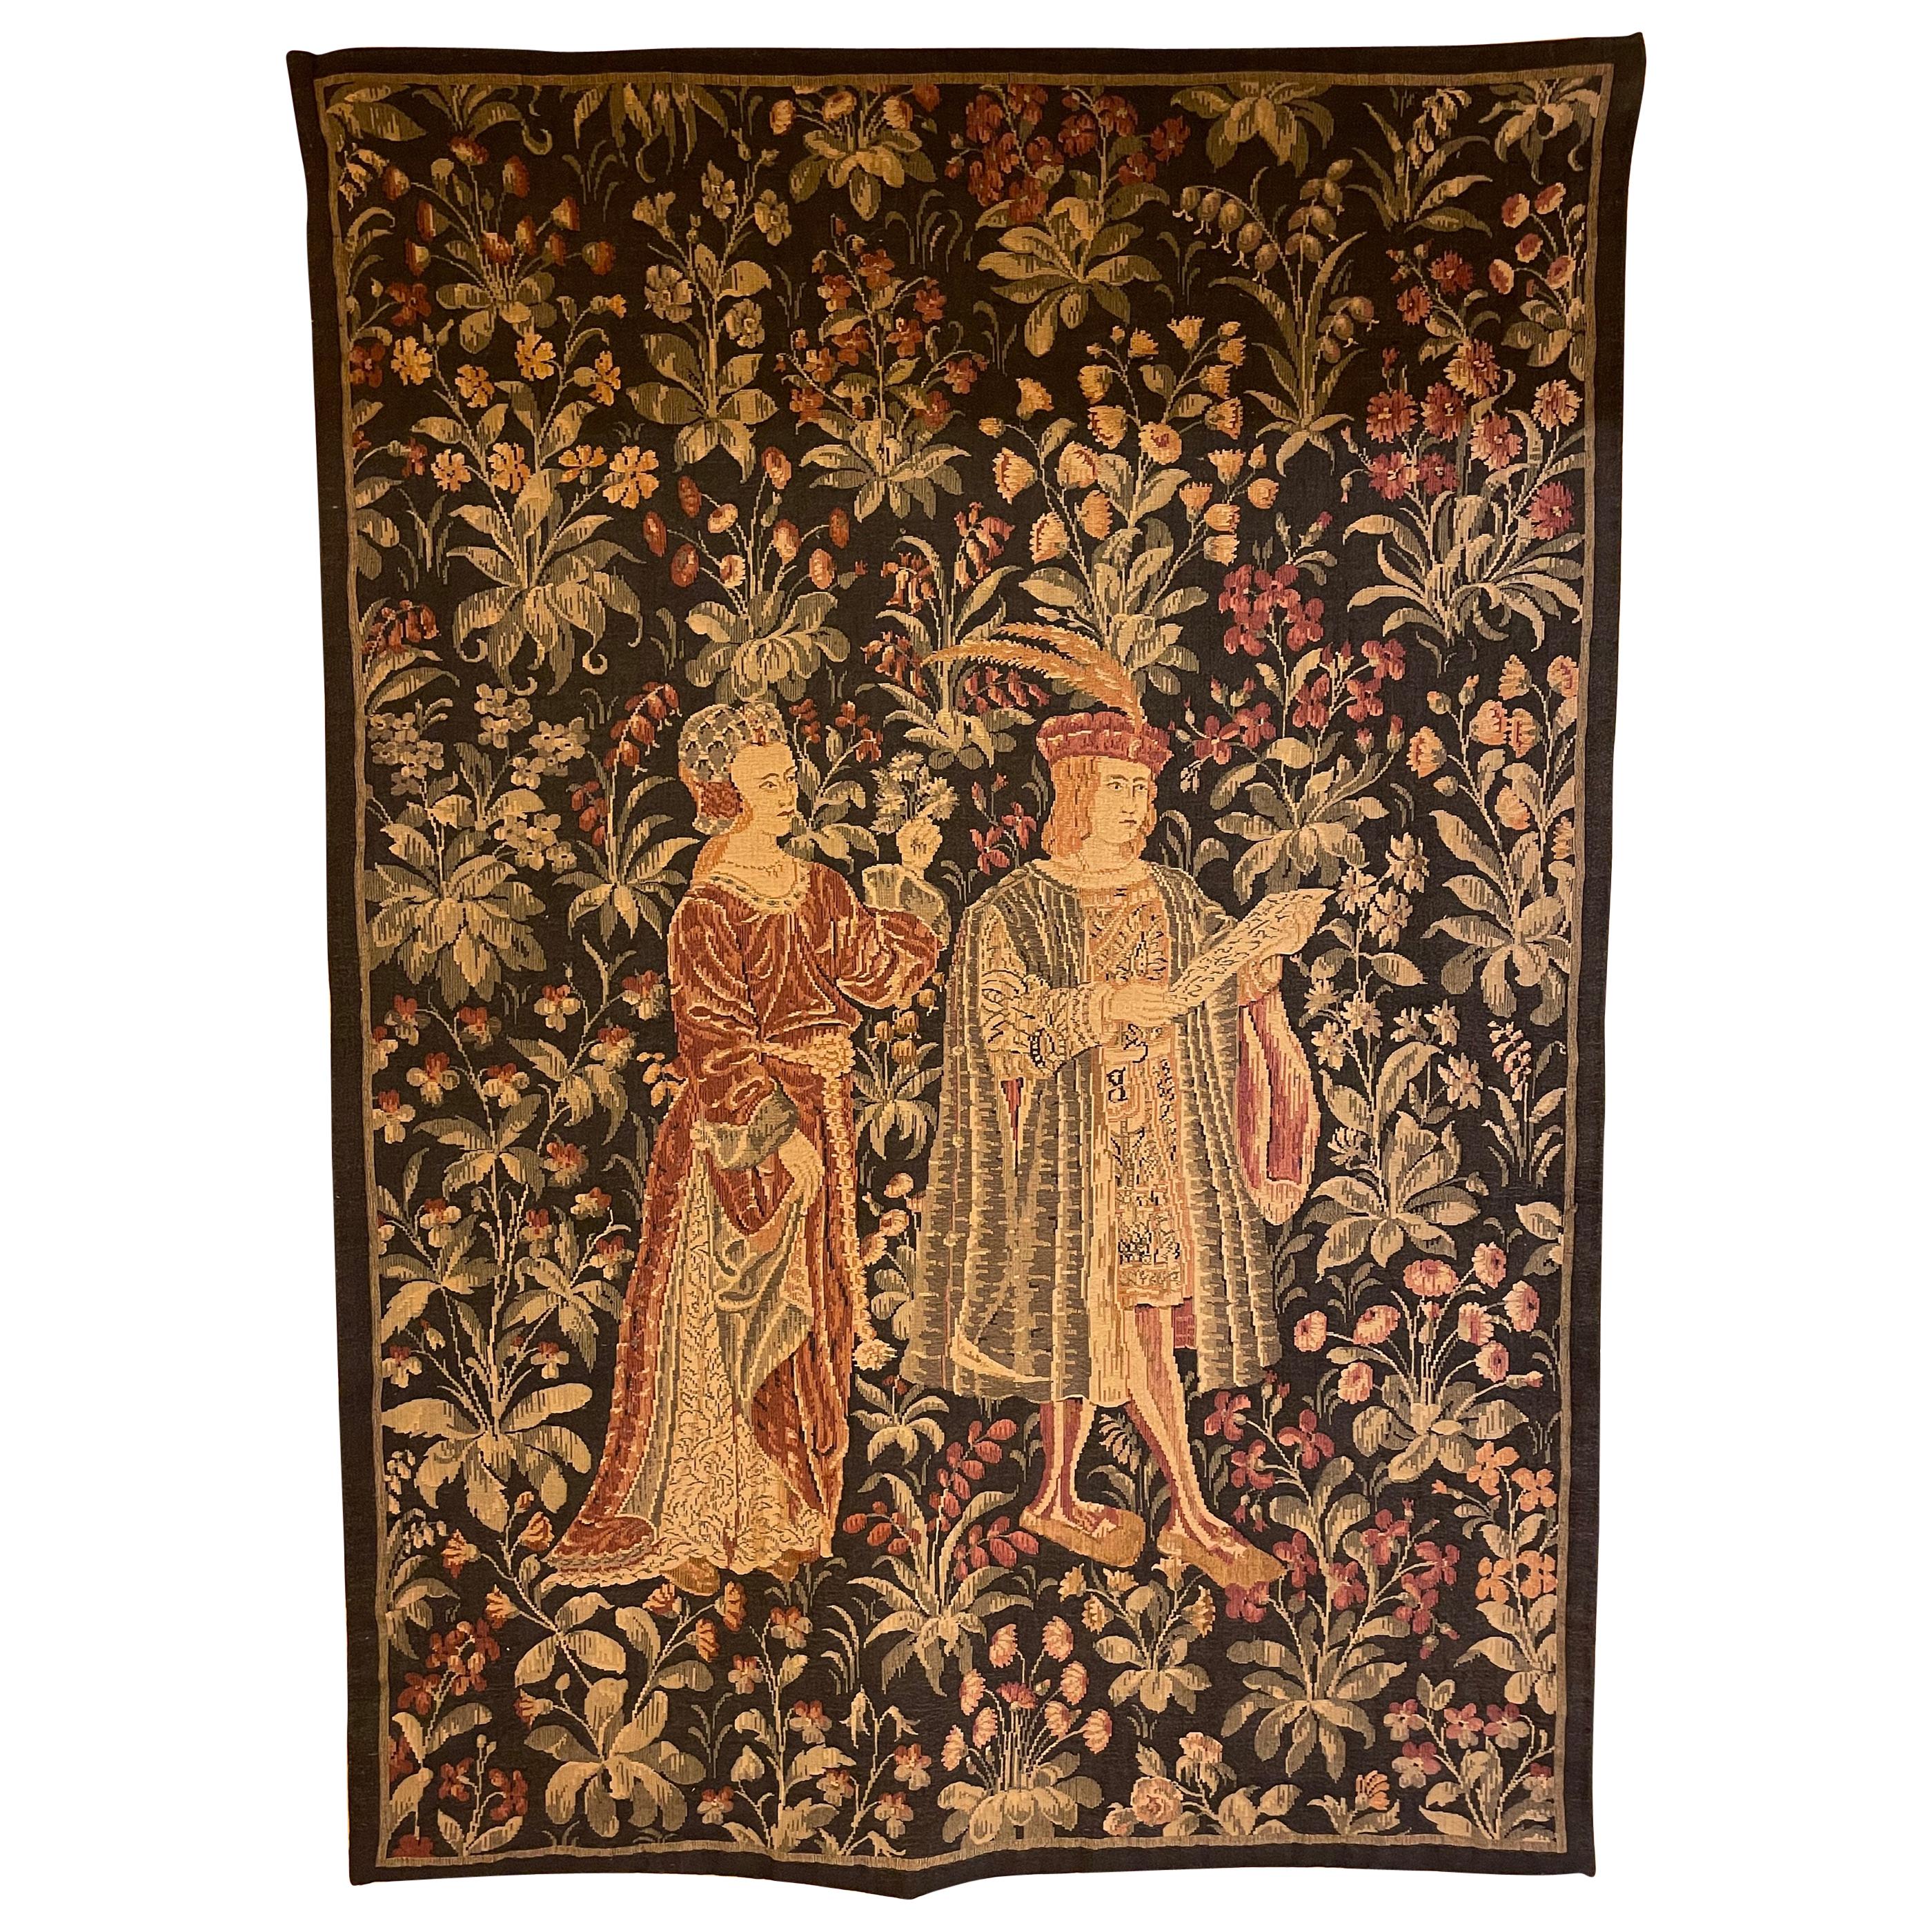 Medieval Tapestry Characters Surrounded by A Thousand Flowers